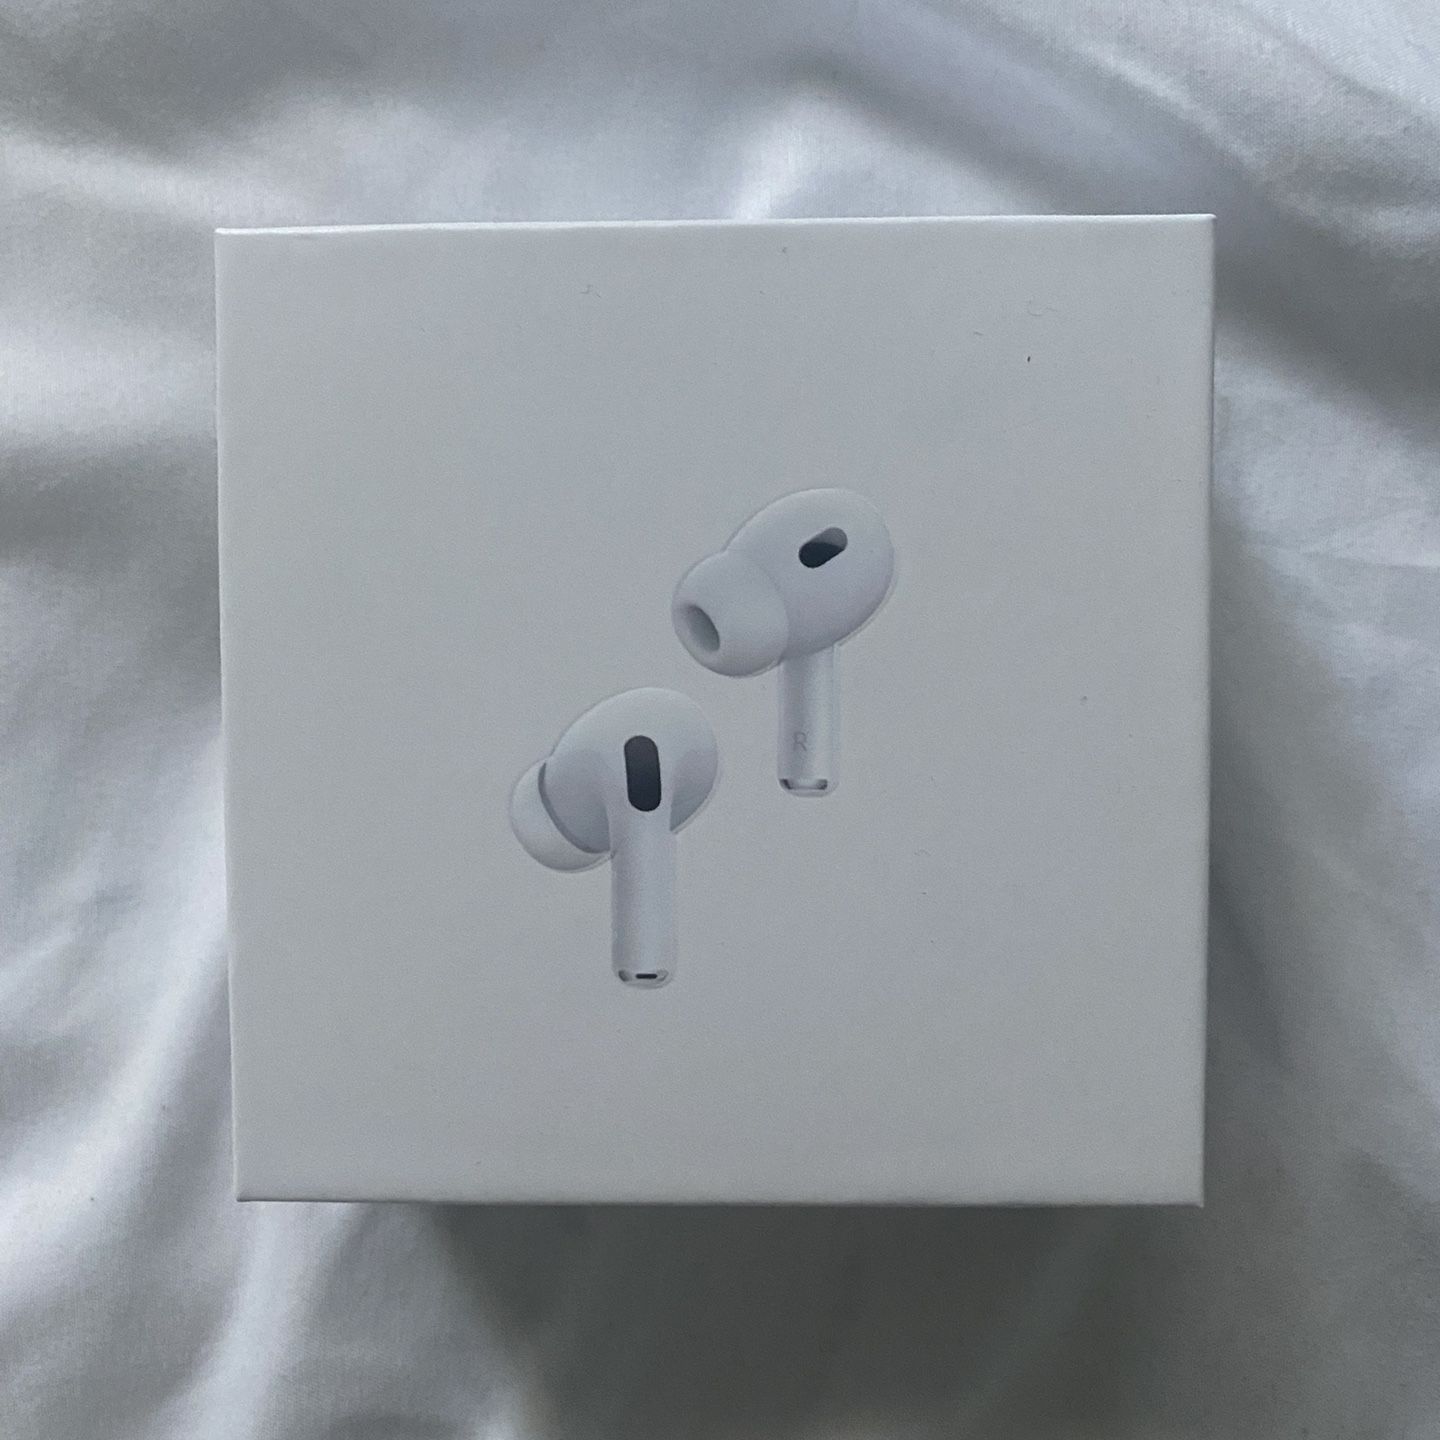 Apple AirPods Pro 2nd Generation- Brand New/Sealed